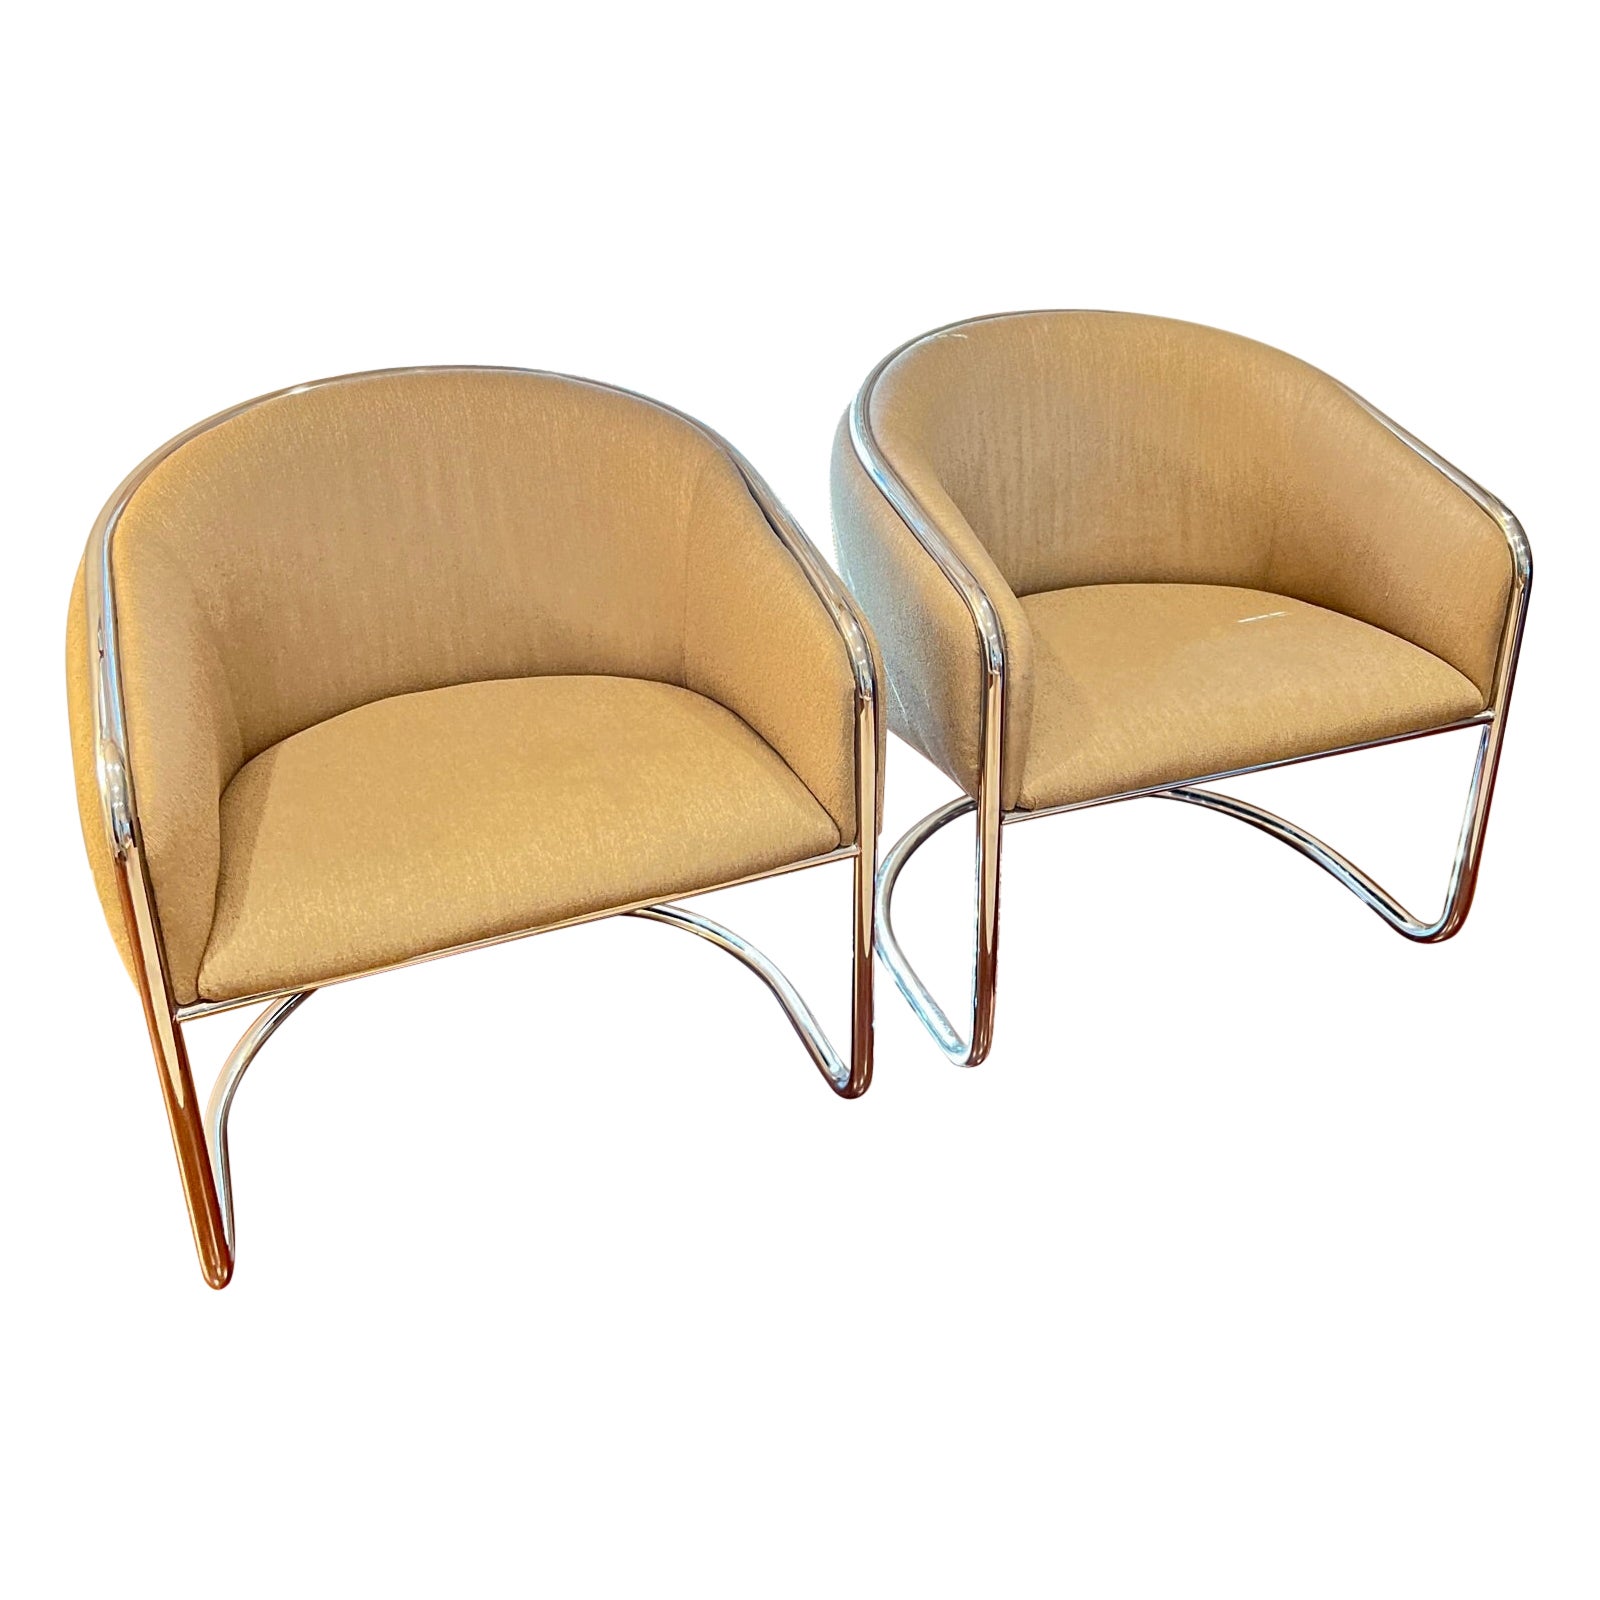 Pair of Cantilevered Chrome Barrel Back Club Chairs by Anton Lorenz for Thonet